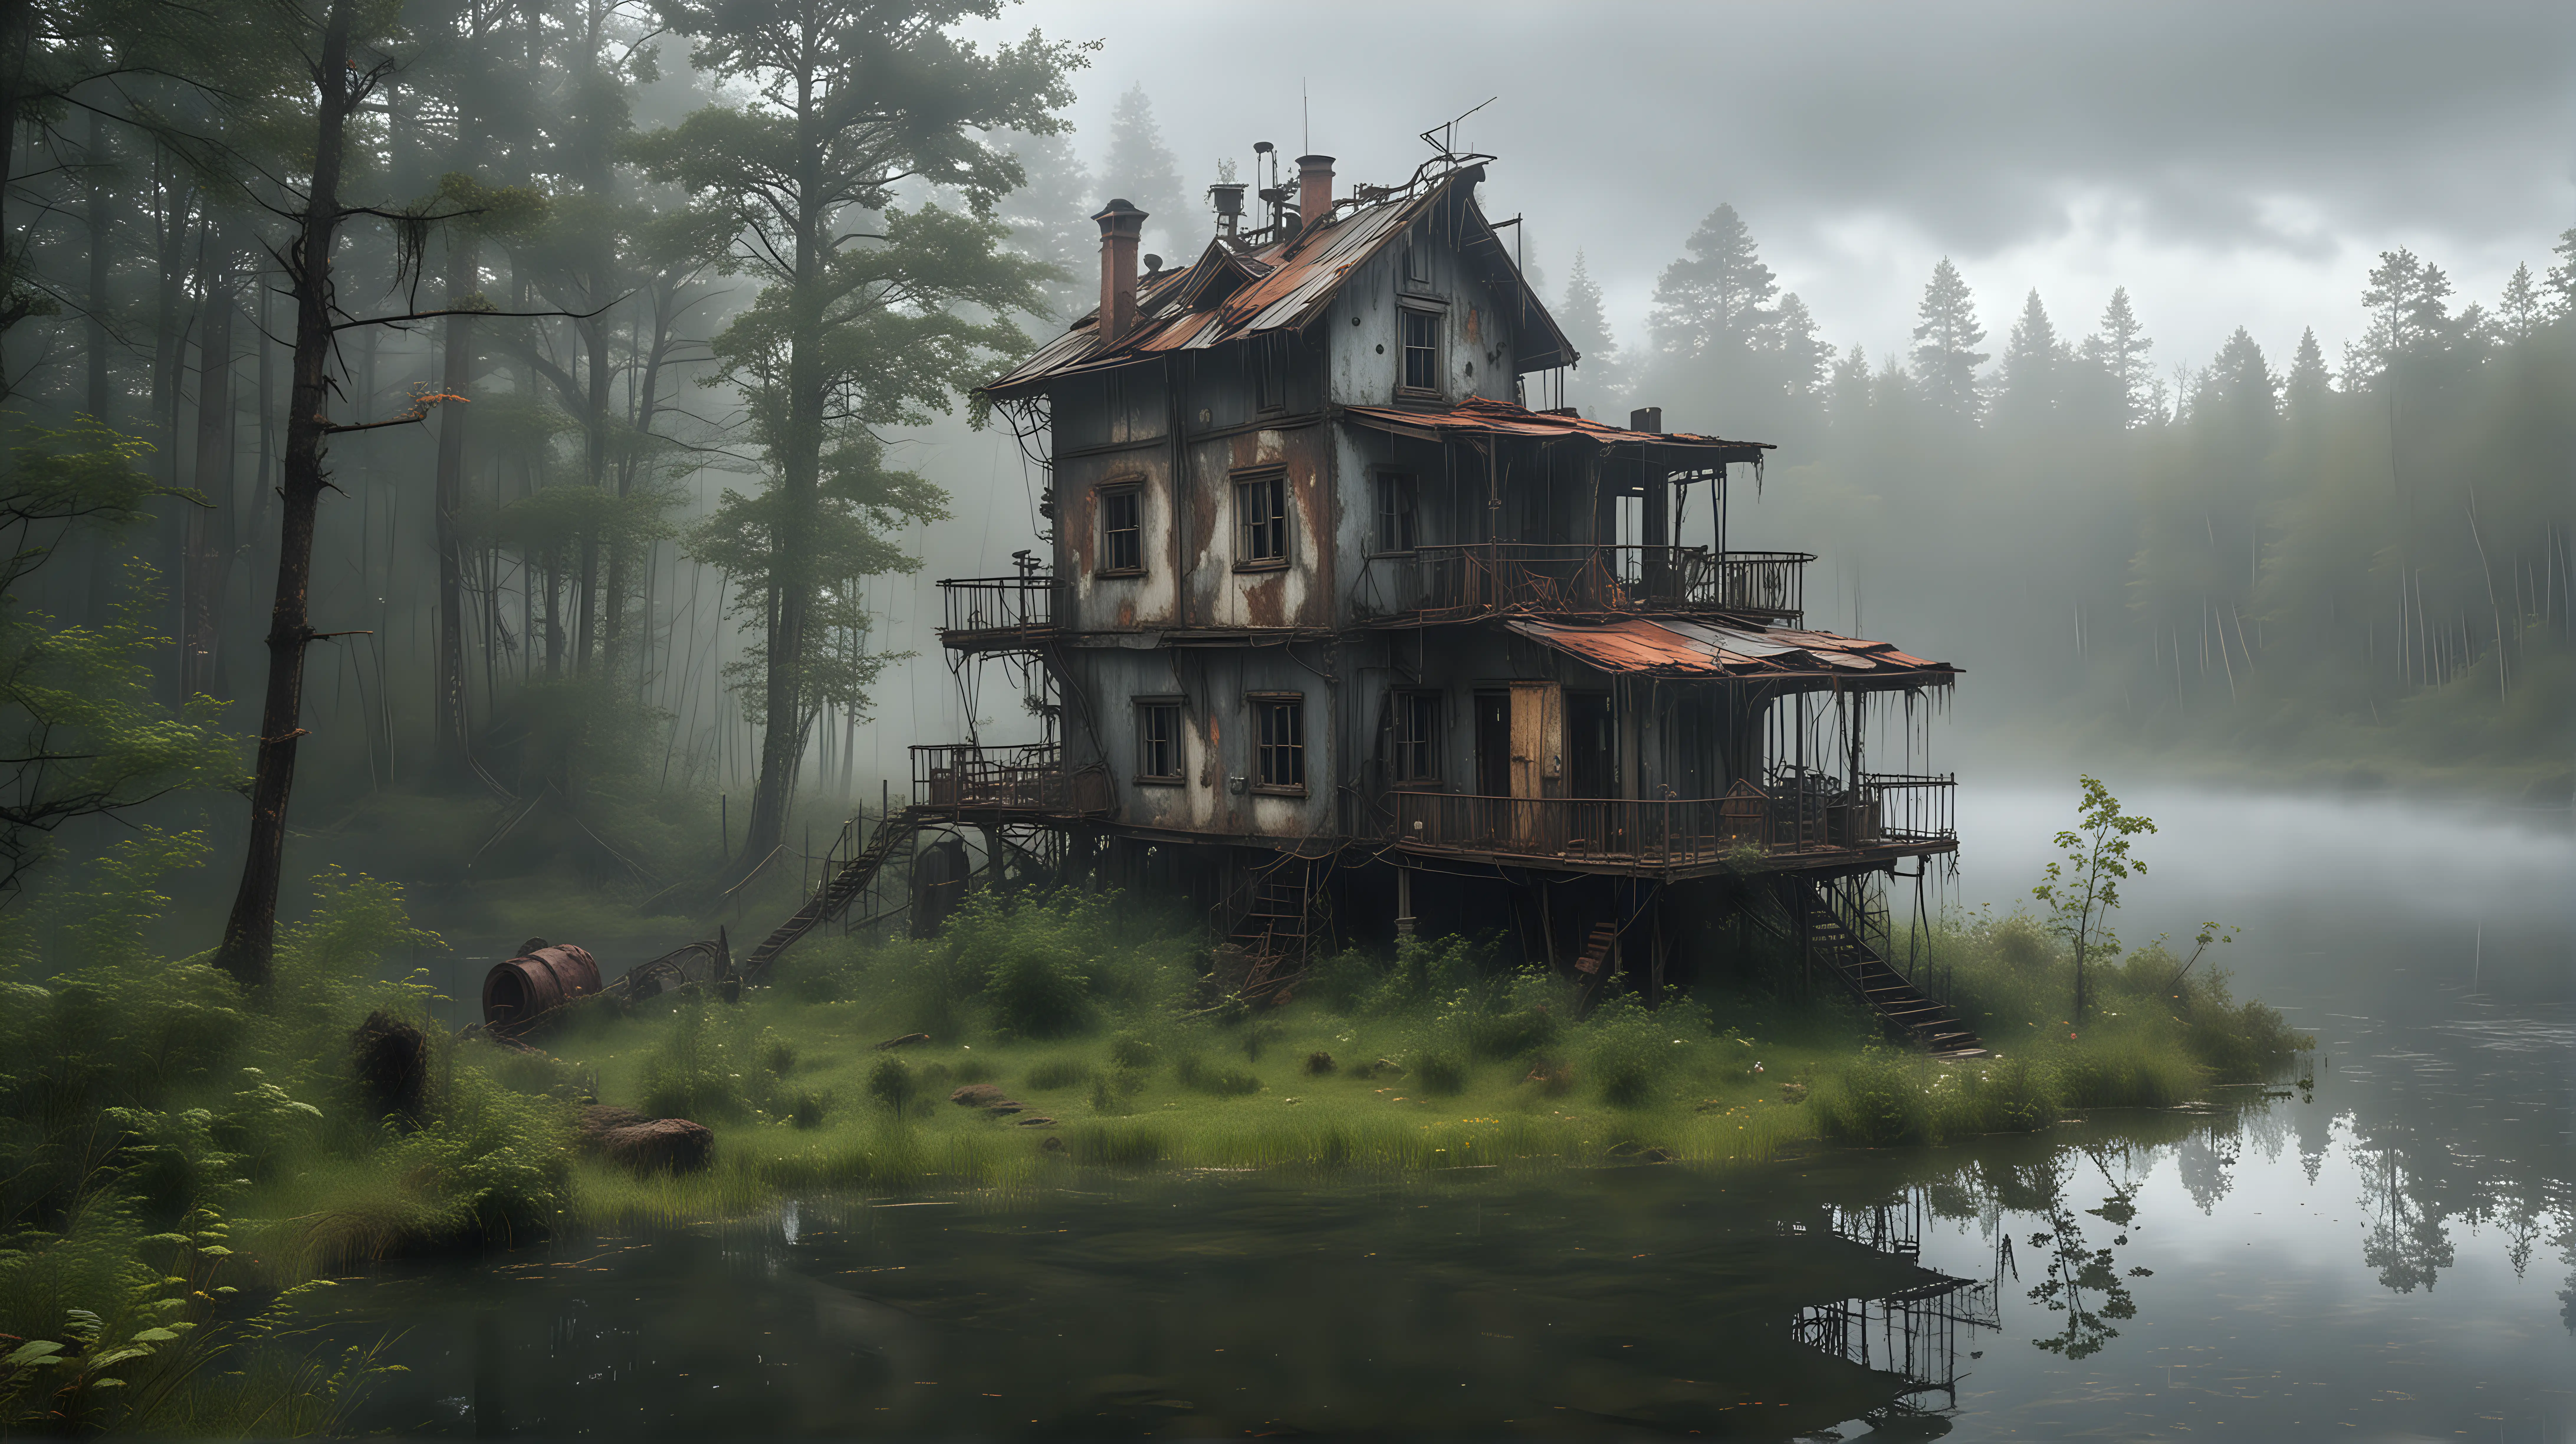 A mysterious, half-ruined steampunk house on a small island on a wild lake in a forest, mist, smoke, rain, cloudy, distant view